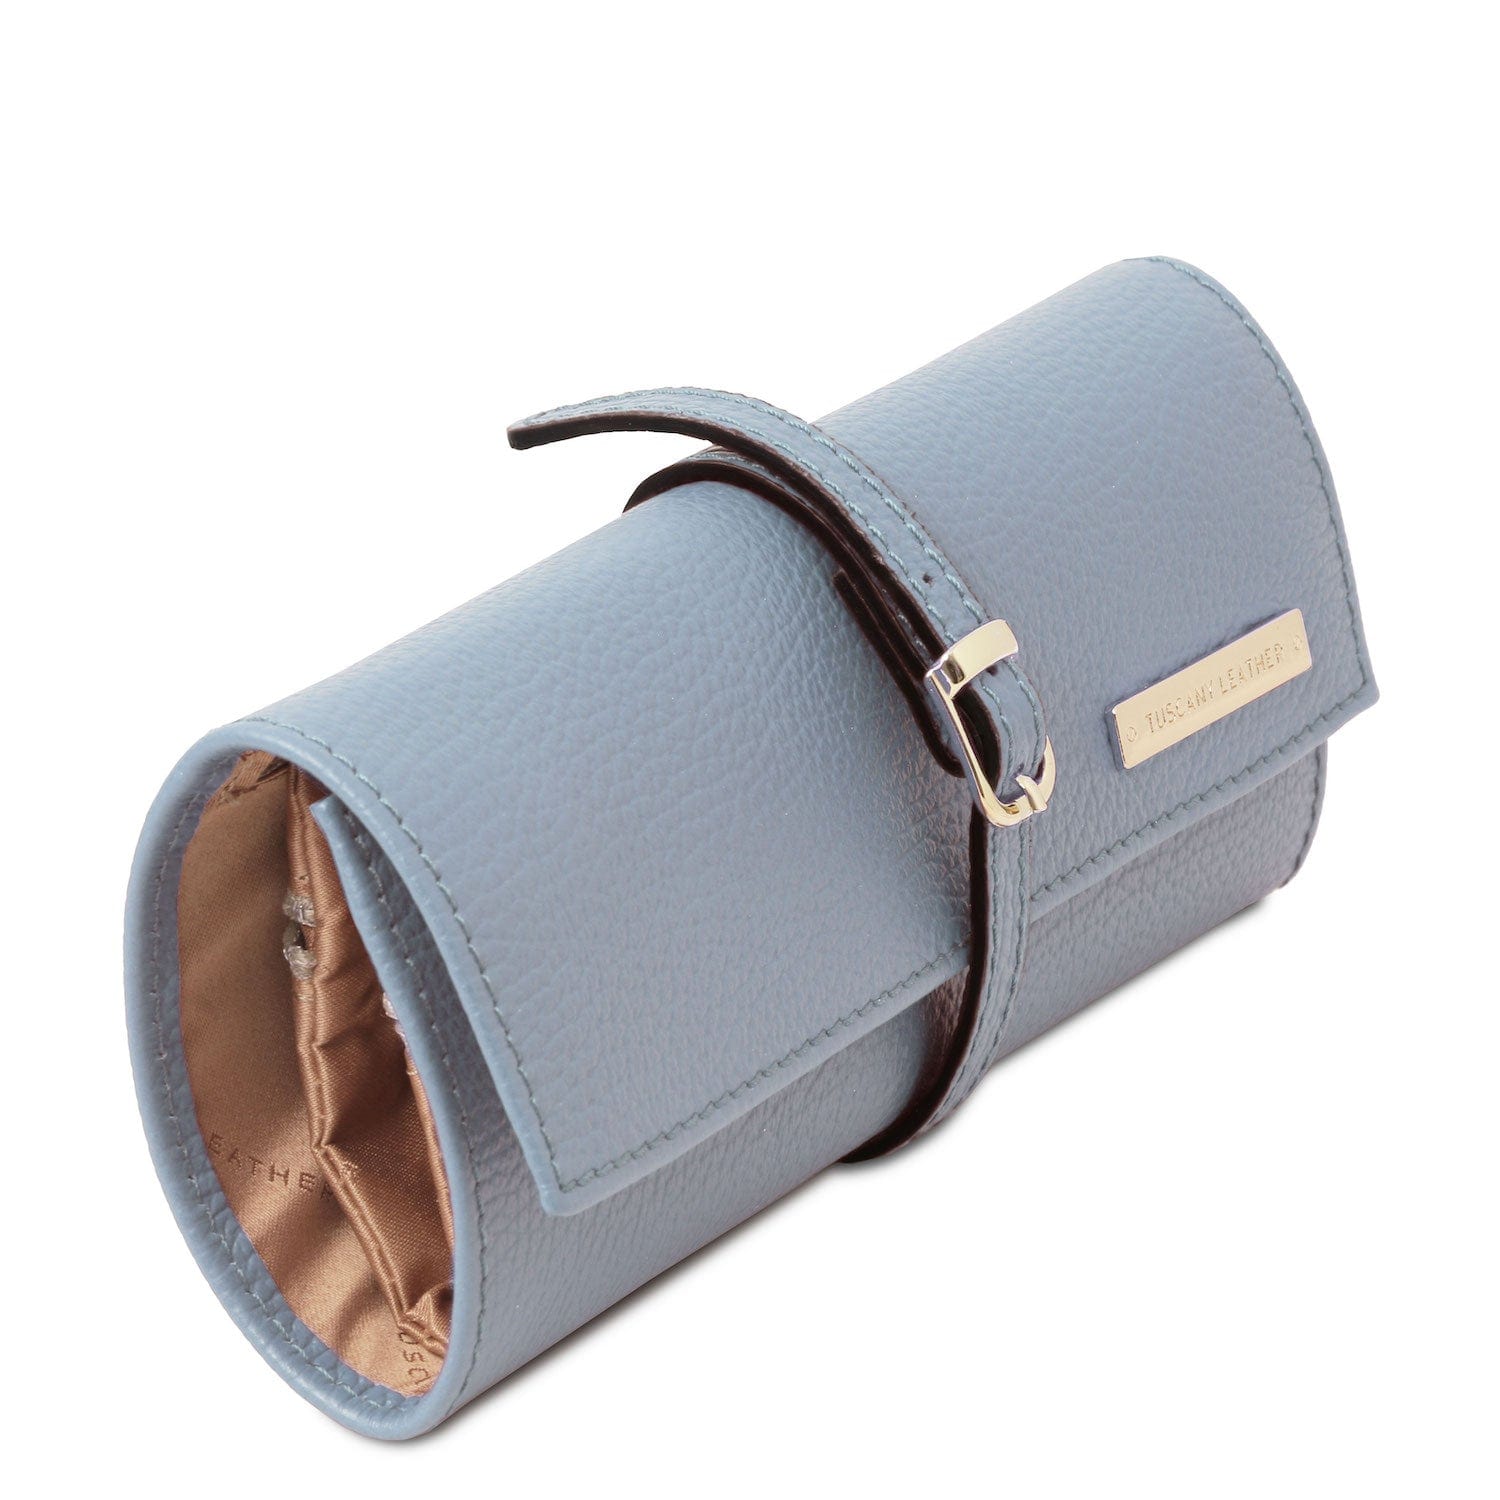 Soft leather jewellery case | TL142193 - Premium Leather accessories for women - Shop now at San Rocco Italia